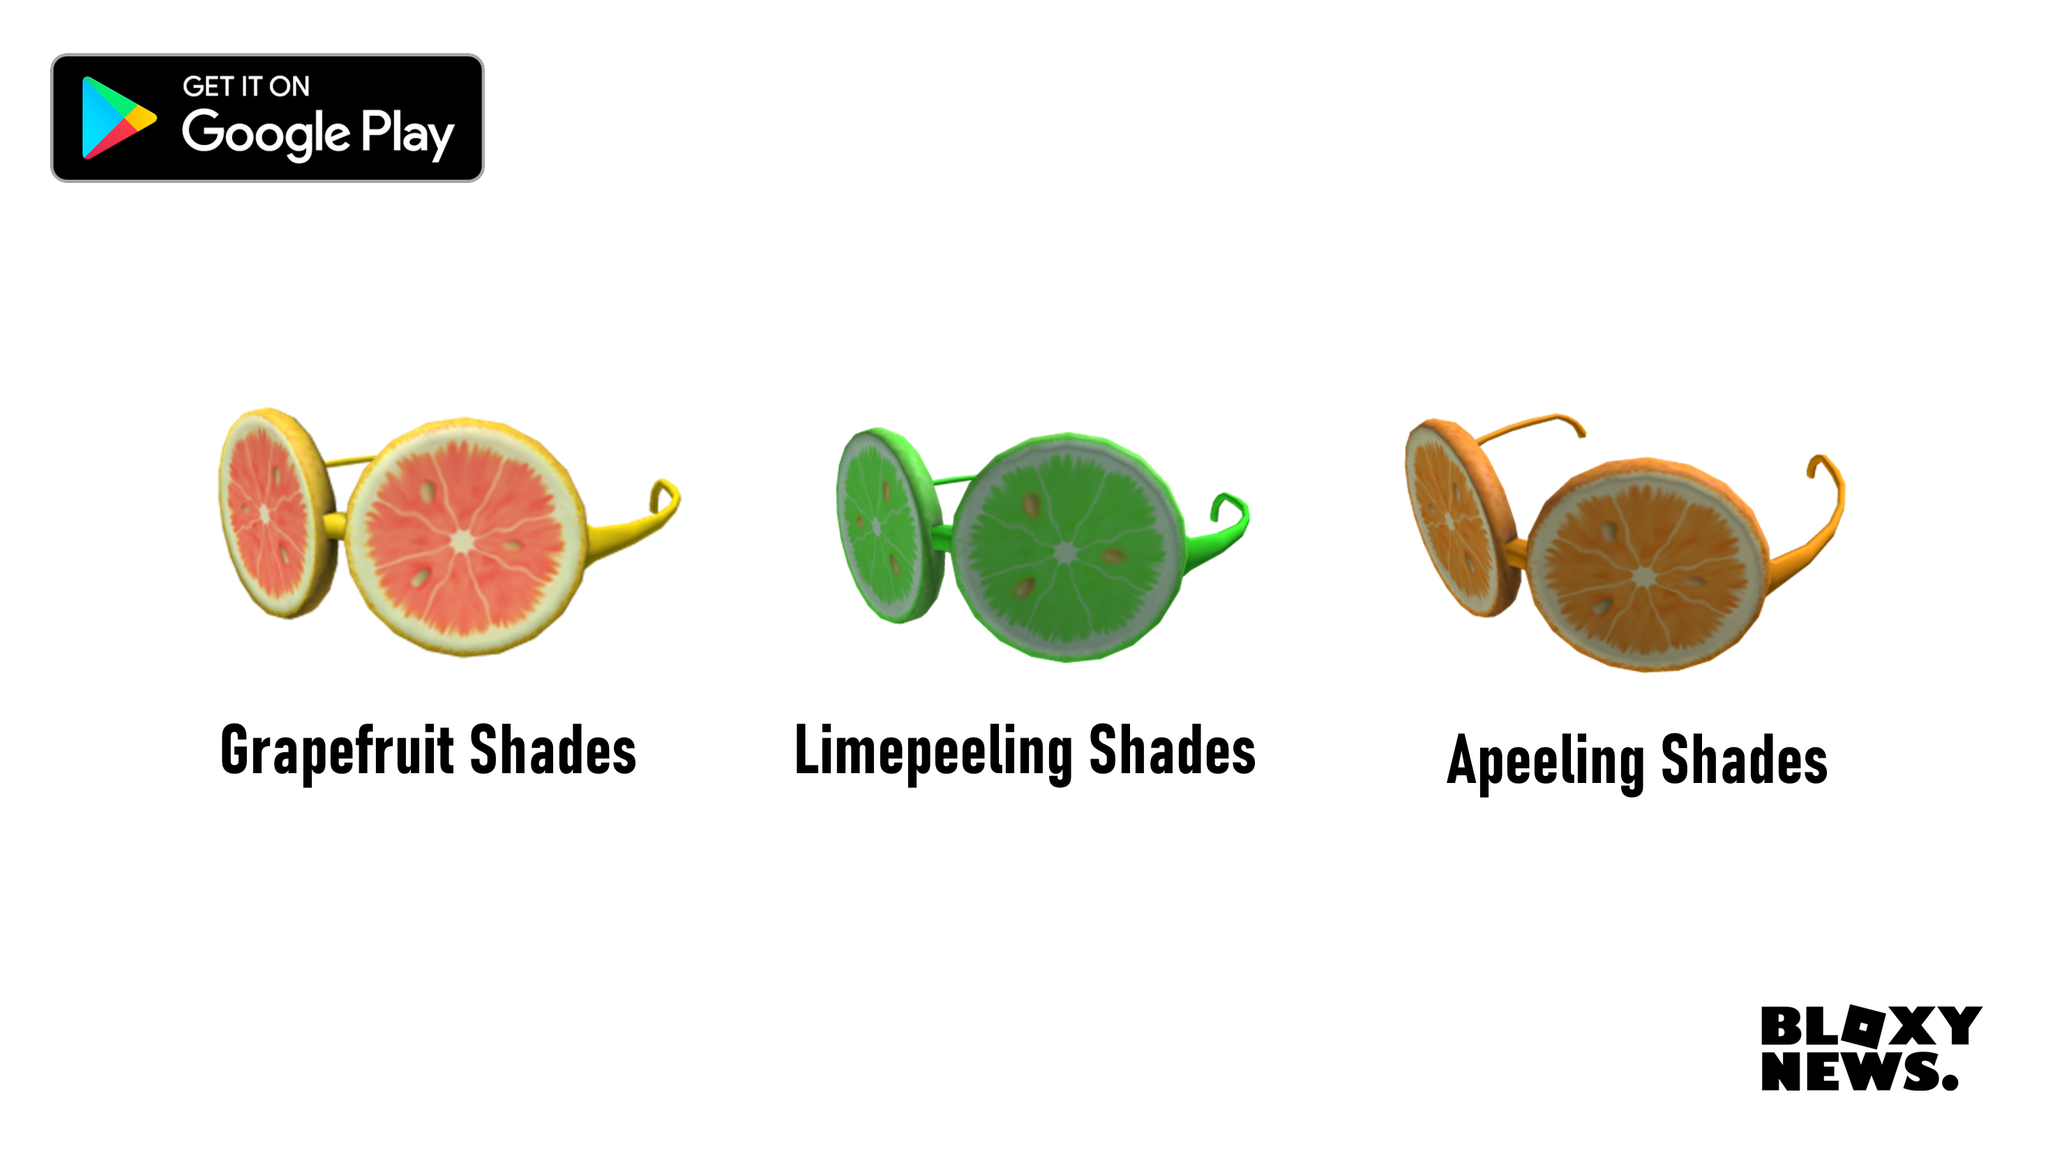 Bloxy News On Twitter Google Play Exclusive For A Limited Time Only Now Through July 30 You Can Get These Fruity Pairs Of Shades On Roblox For R 80 Each Grapefruit Shades - google play roblox update